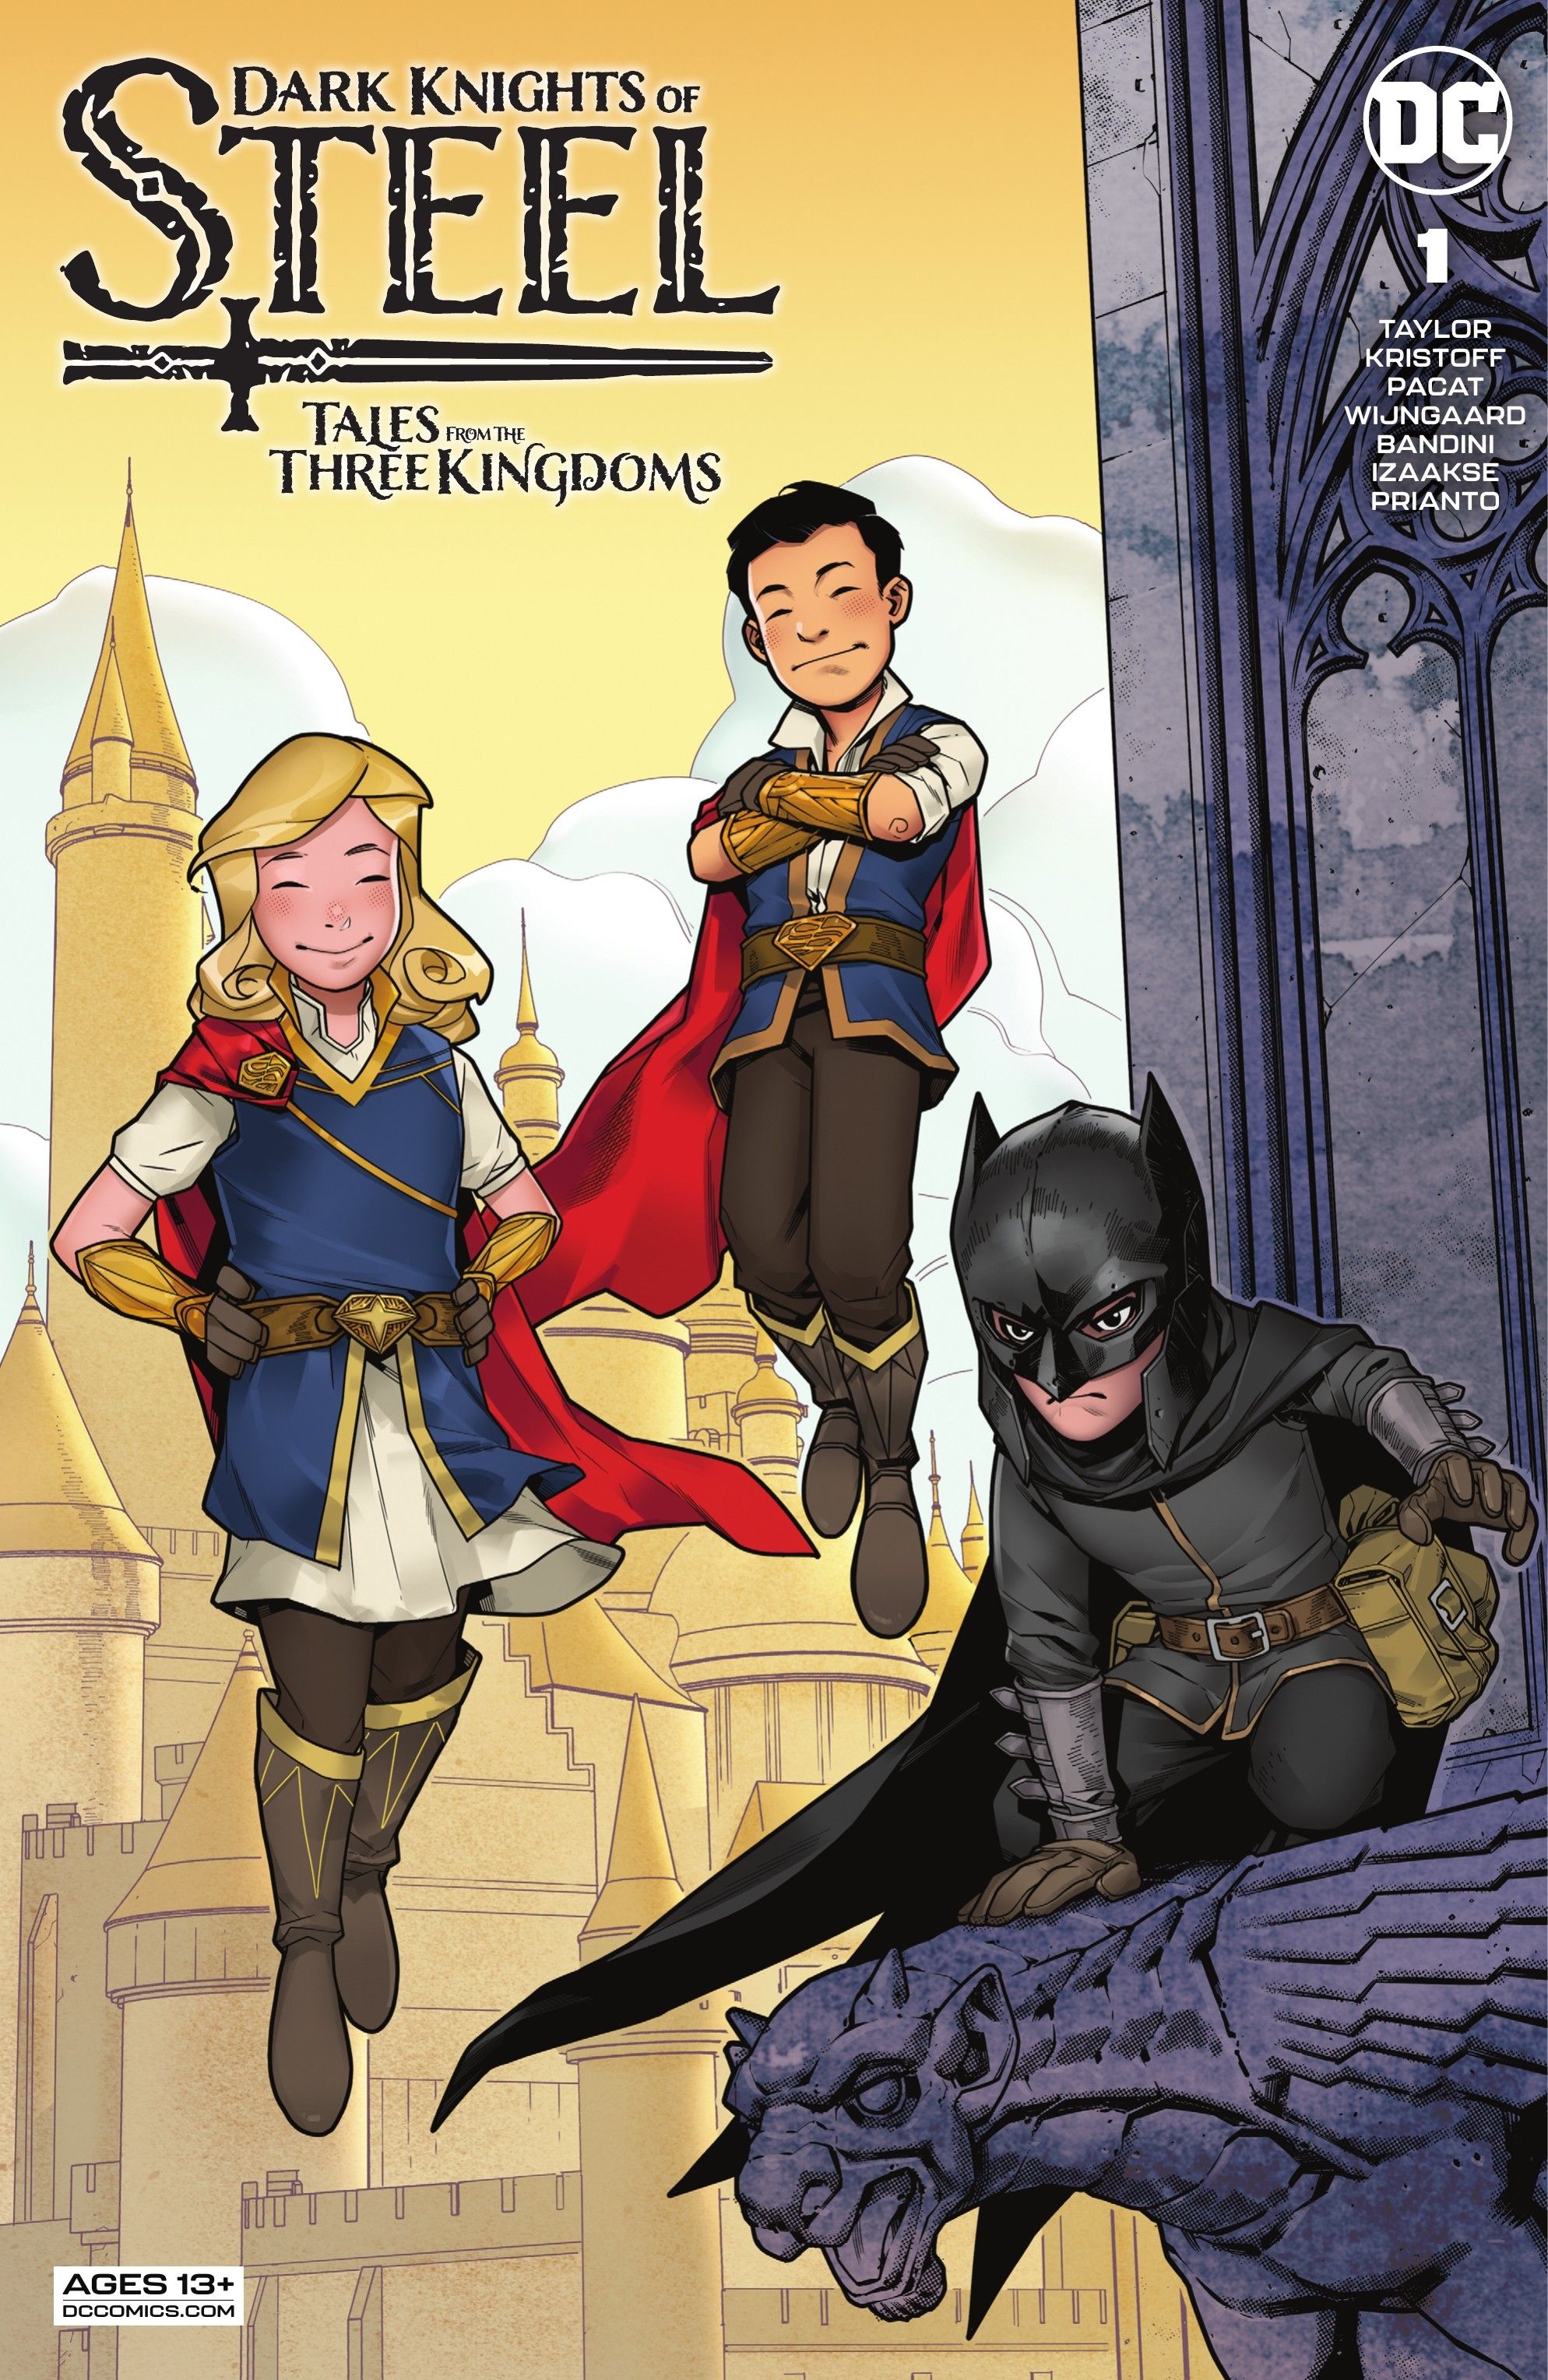 Dark Knights of Steel Tales from the Three Kingdoms #1 Cover